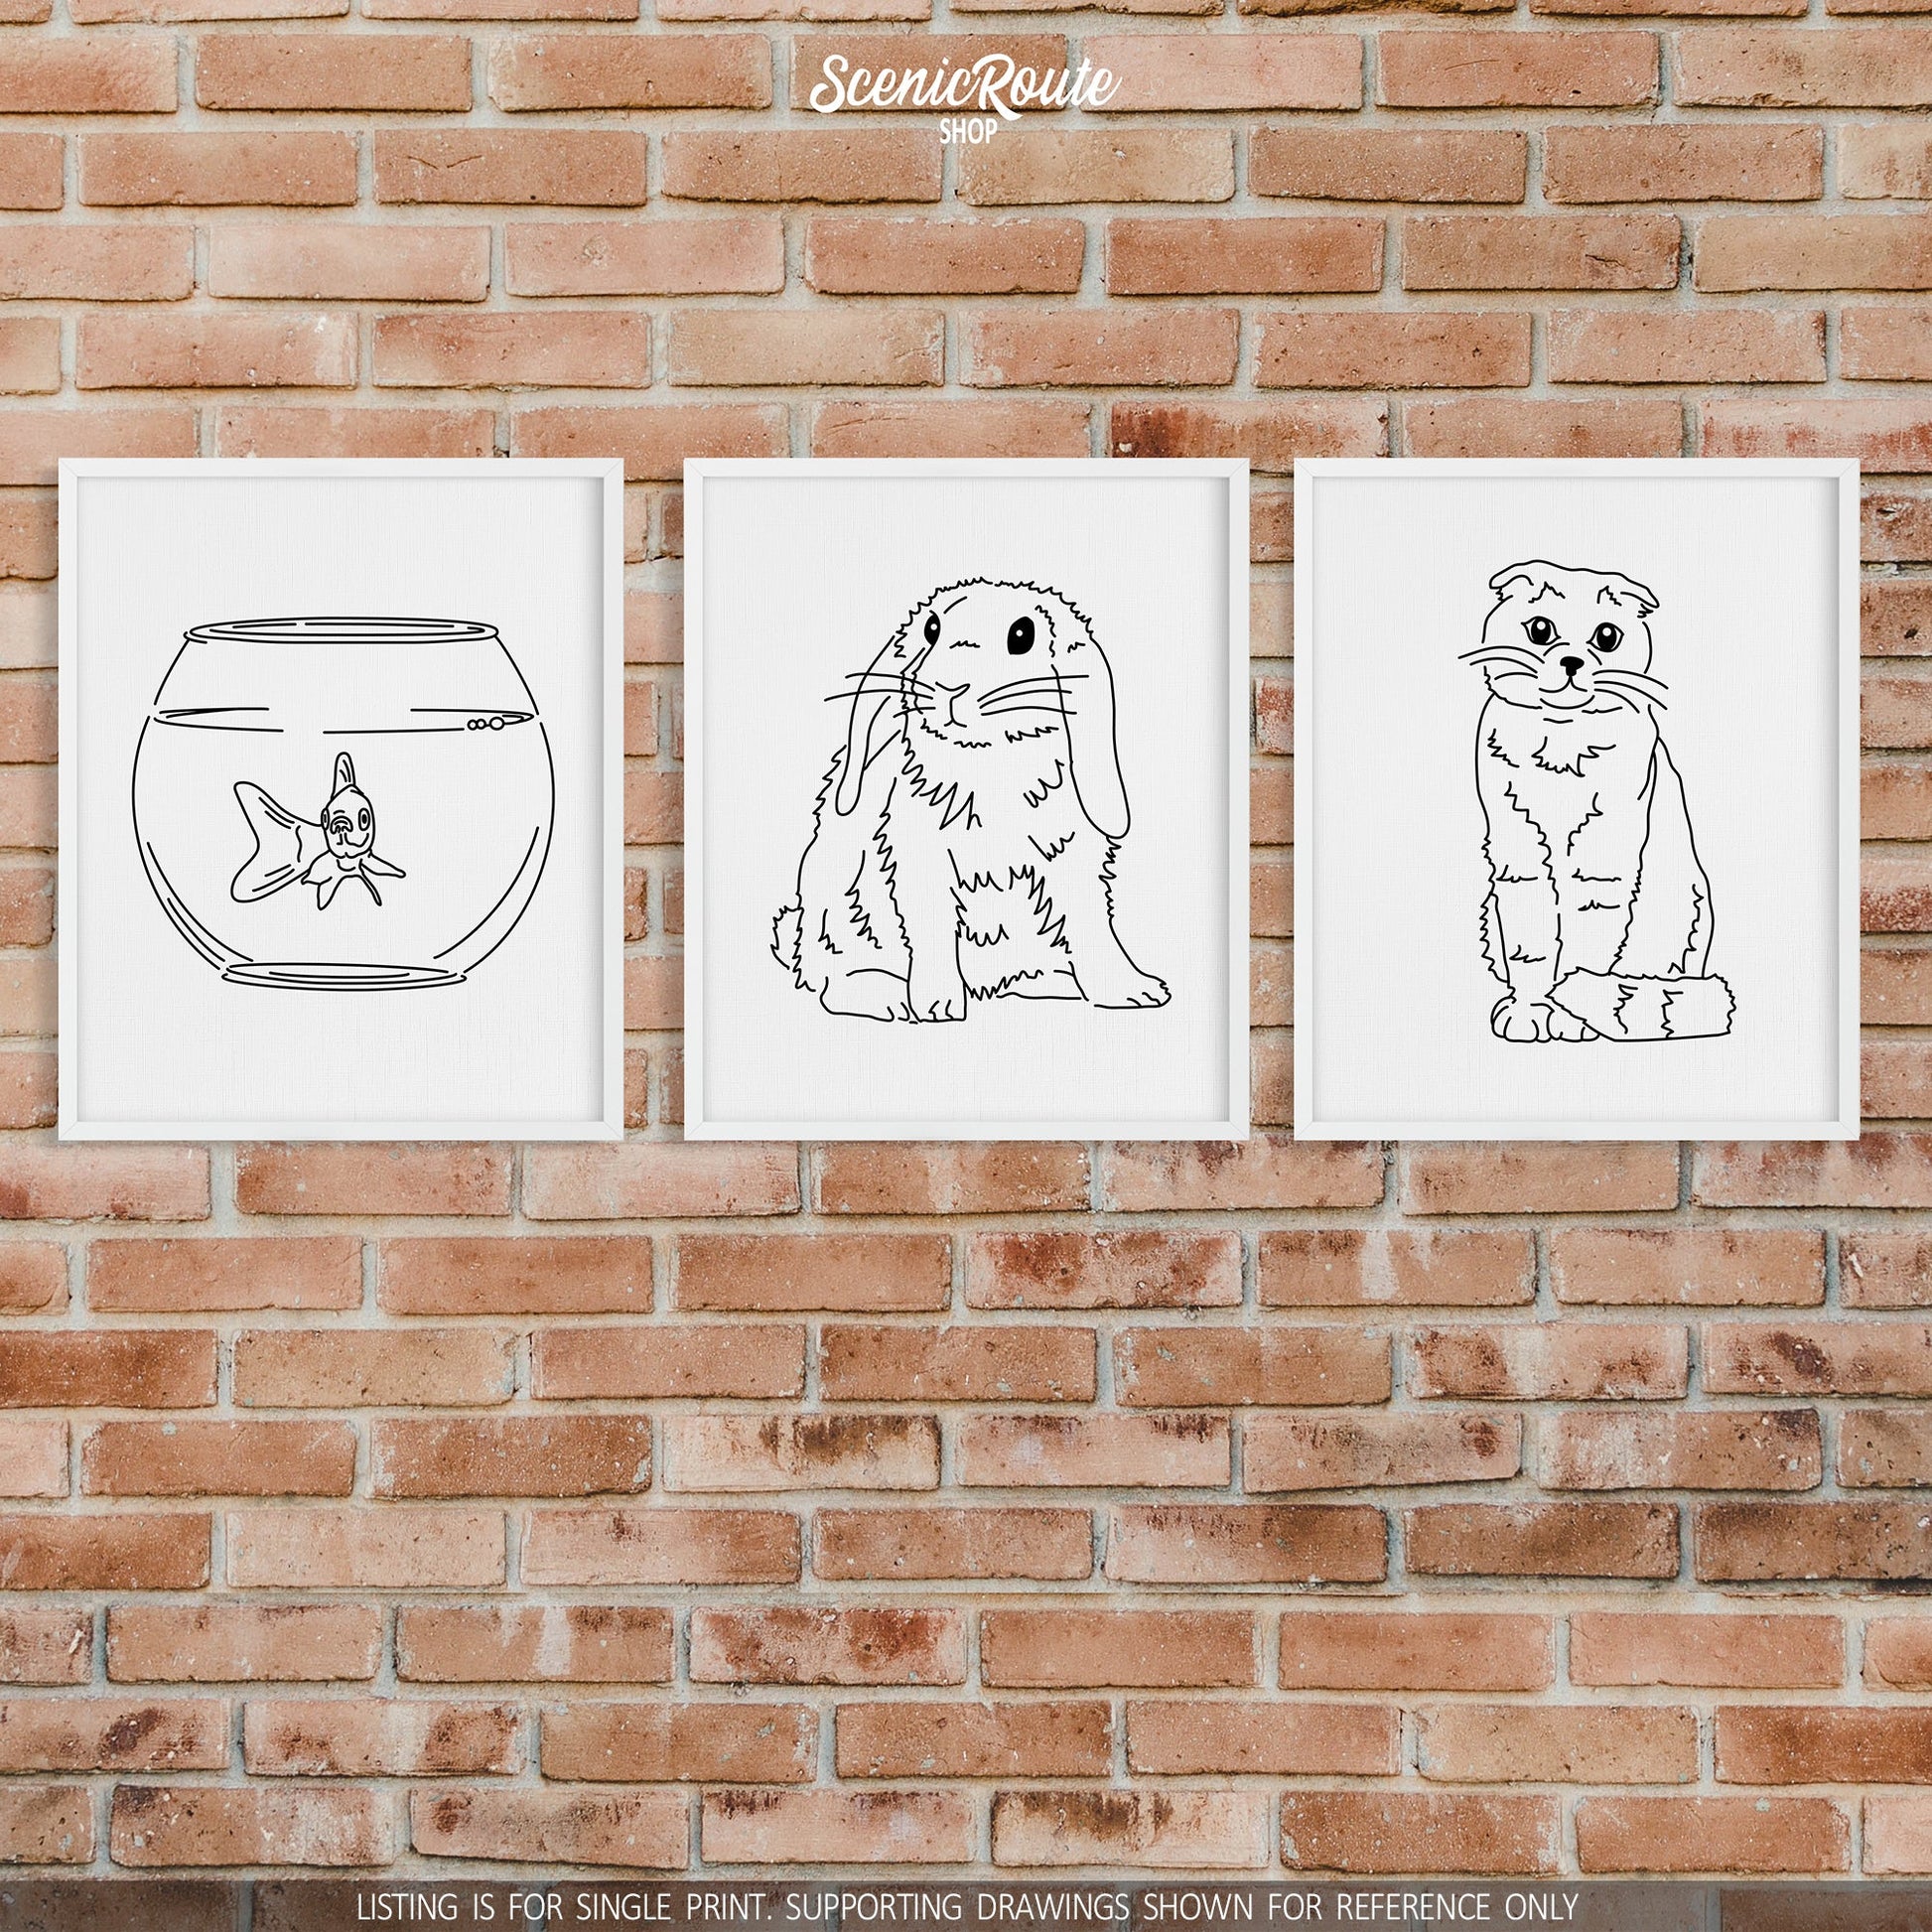 A group of three framed drawings on a brick wall. The line art drawings include a Goldfish, a Mini Lop Rabbit, and a Scottish Fold cat